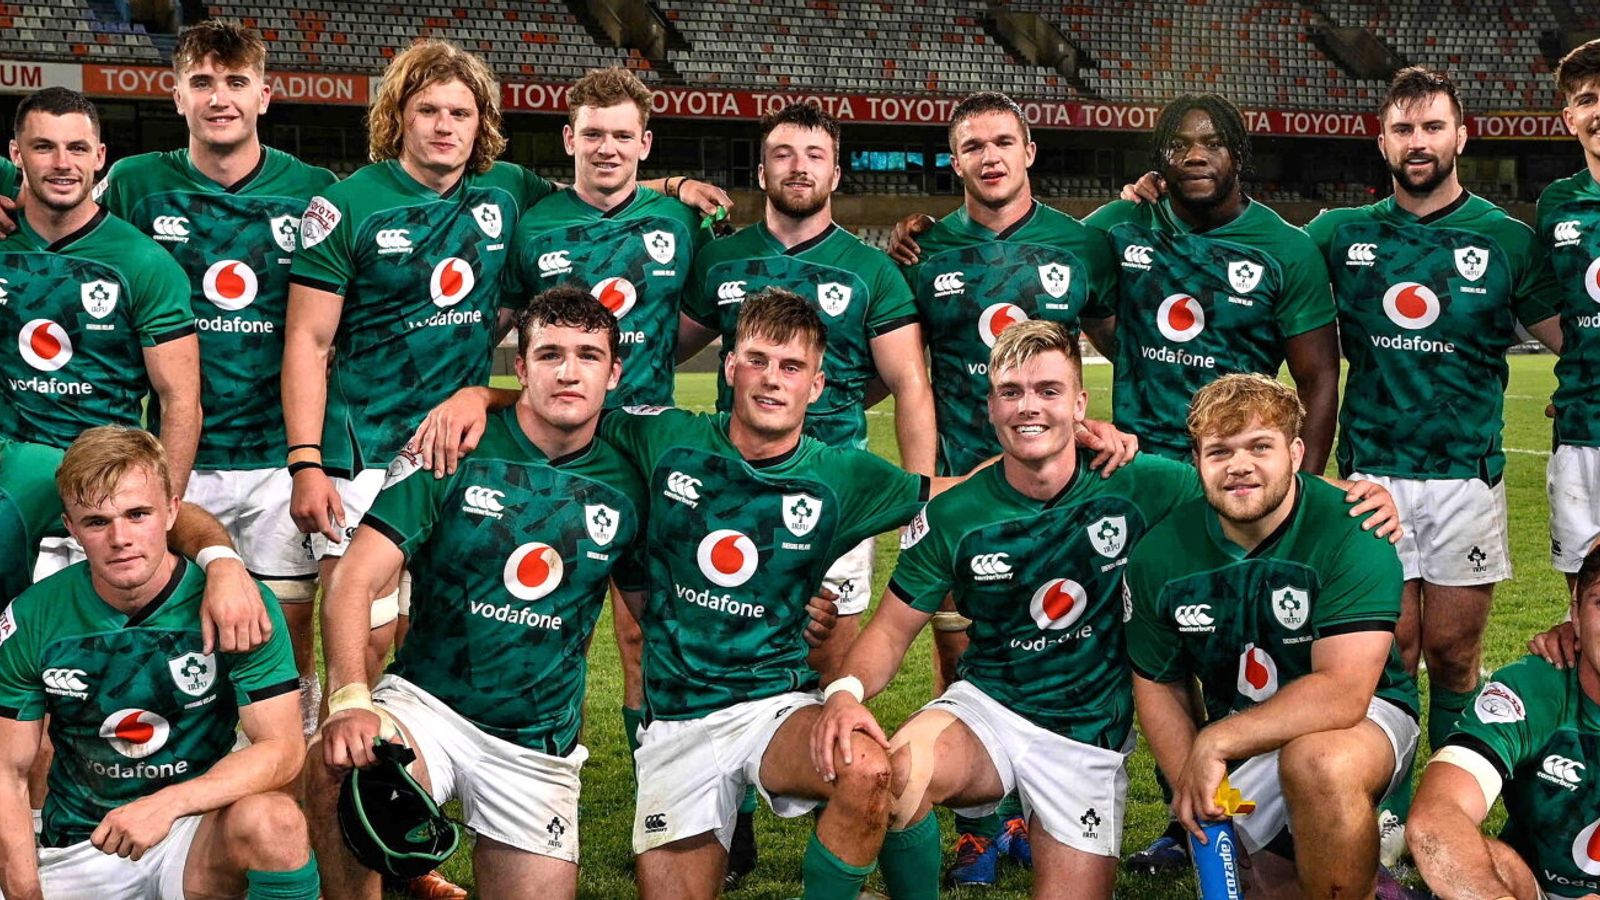 Rugby Union News: Emerging Ireland pick up back-to-back wins in South Africa